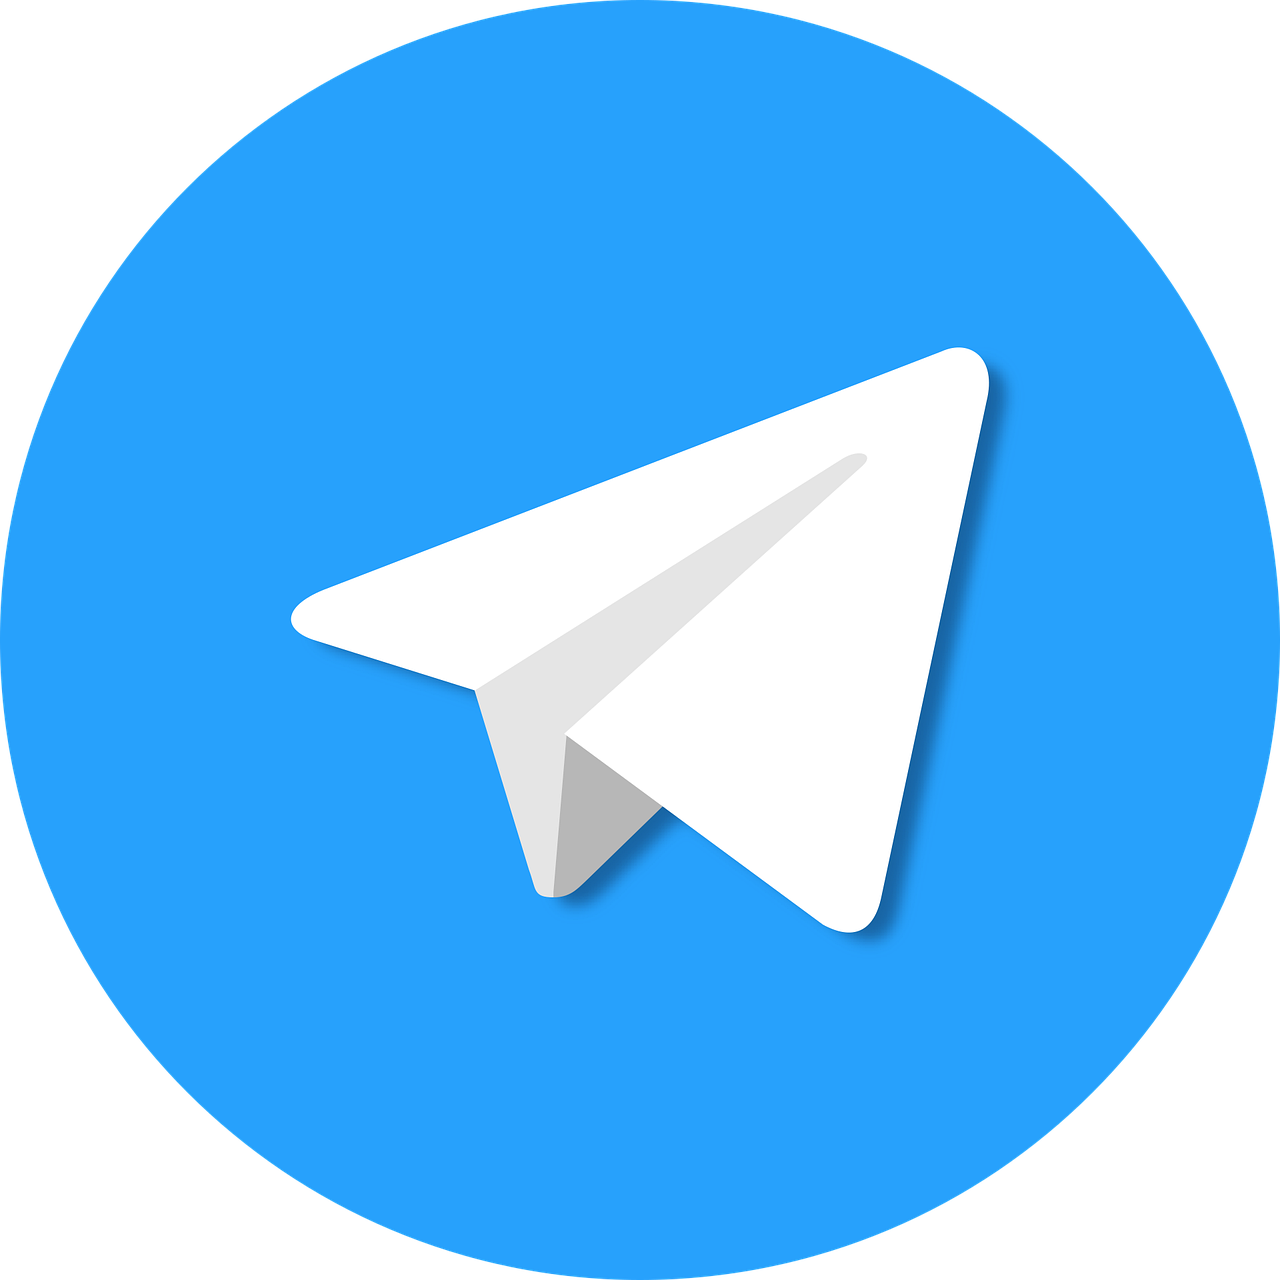 How to change the text size in Telegram